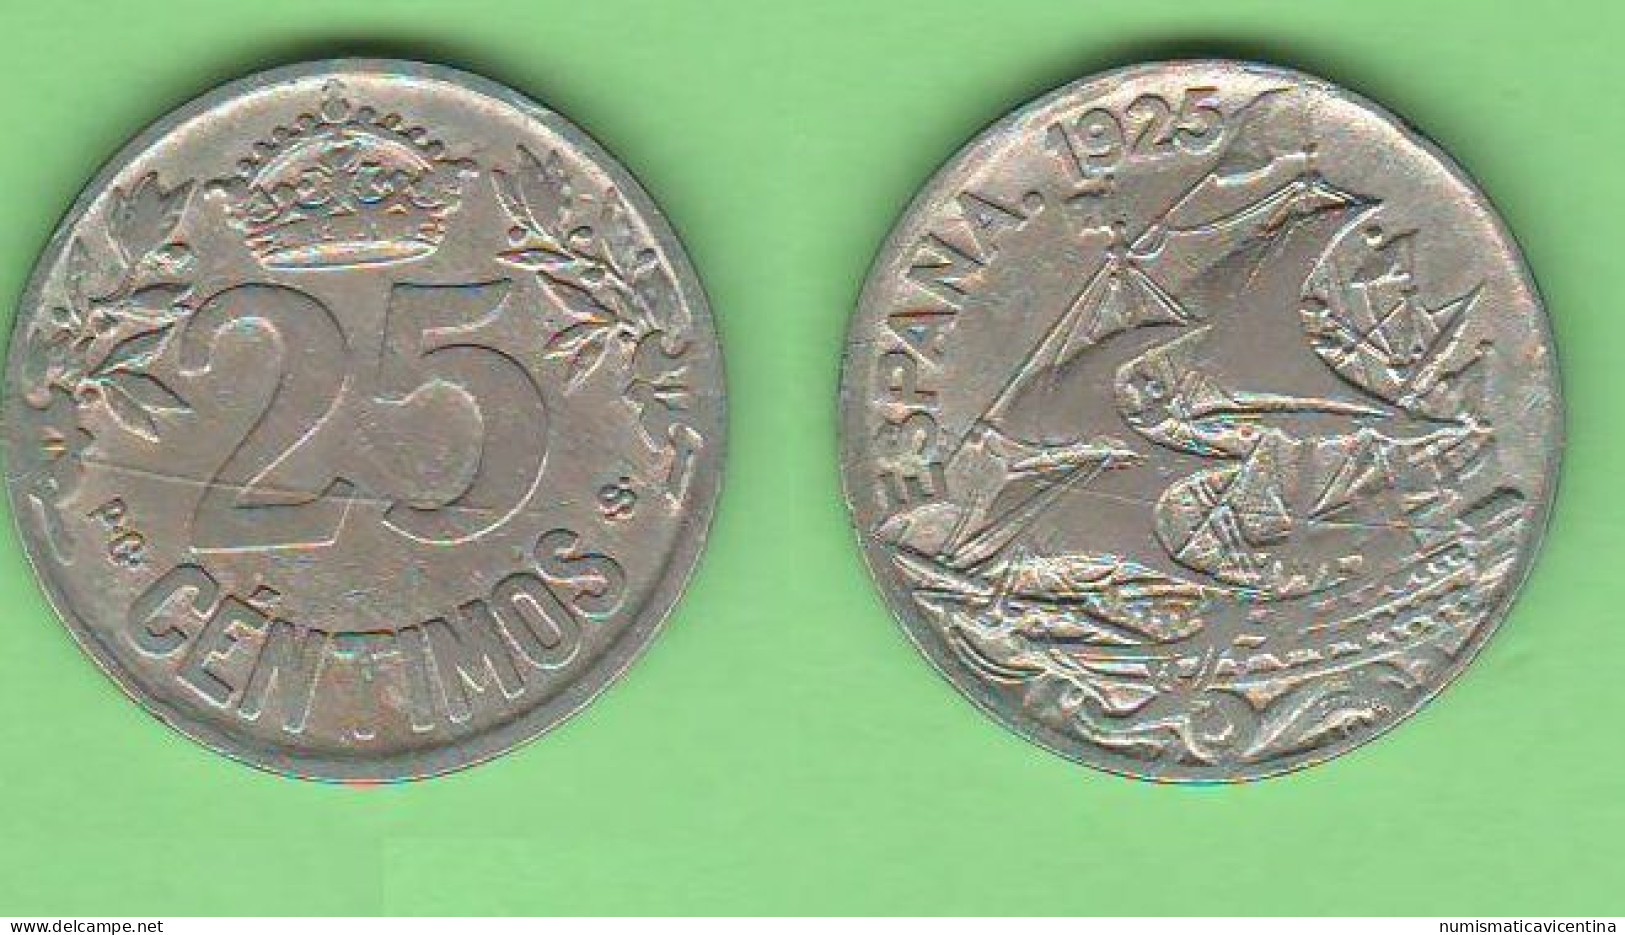 Spain Spagna 25 Cèntimos 1925 Typological Coin  K 740 - First Minting